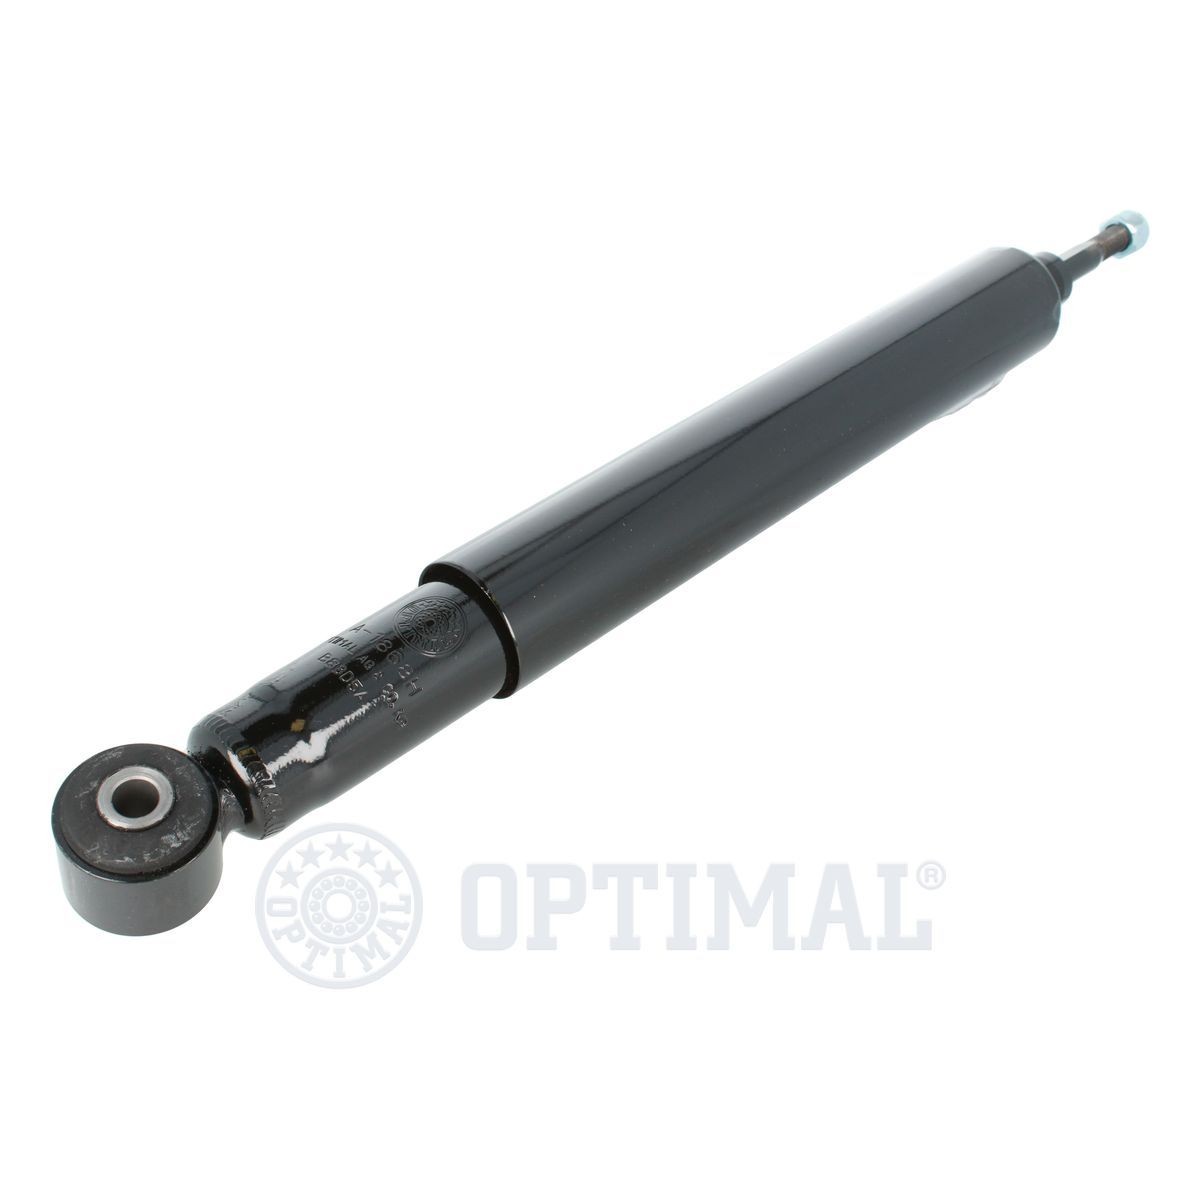 A-1868H OPTIMAL Shock absorbers FORD Front Axle, Oil Pressure, Twin-Tube, Suspension Strut, Spring-bearing Damper, Bottom eye, Top pin